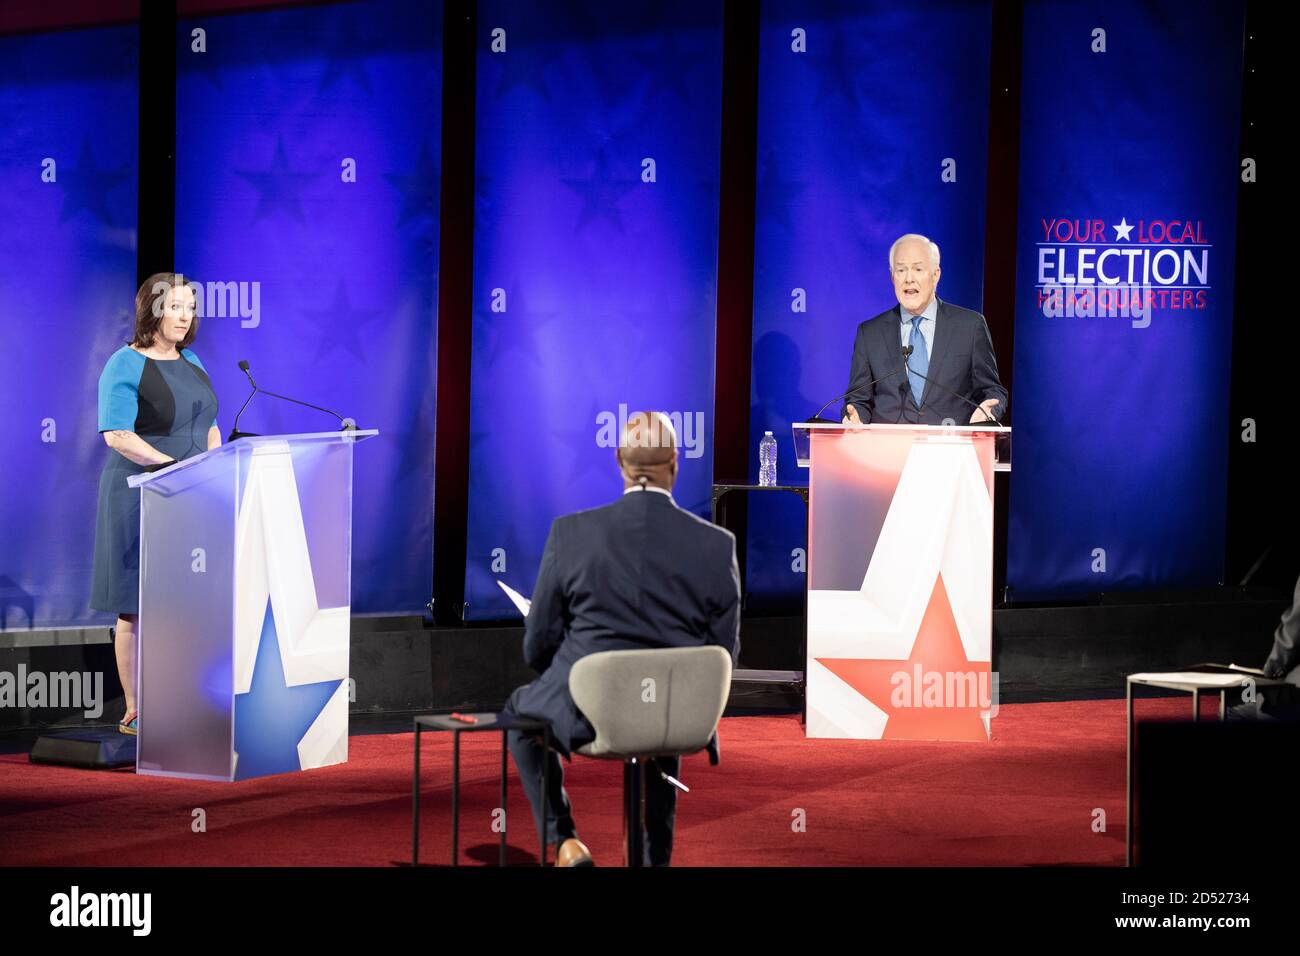 Austin TX USA, Oct. 9 2020: Democratic challenger MJ Hegar (l) answers a question while debating three-term U.S. Senator John Cornyn. The 44-year old decorated war veteran attempts to unseat Cornyn, a Republican stalwart. Moderator Gromer Jeffers Jr. sits in the foreground. Stock Photo